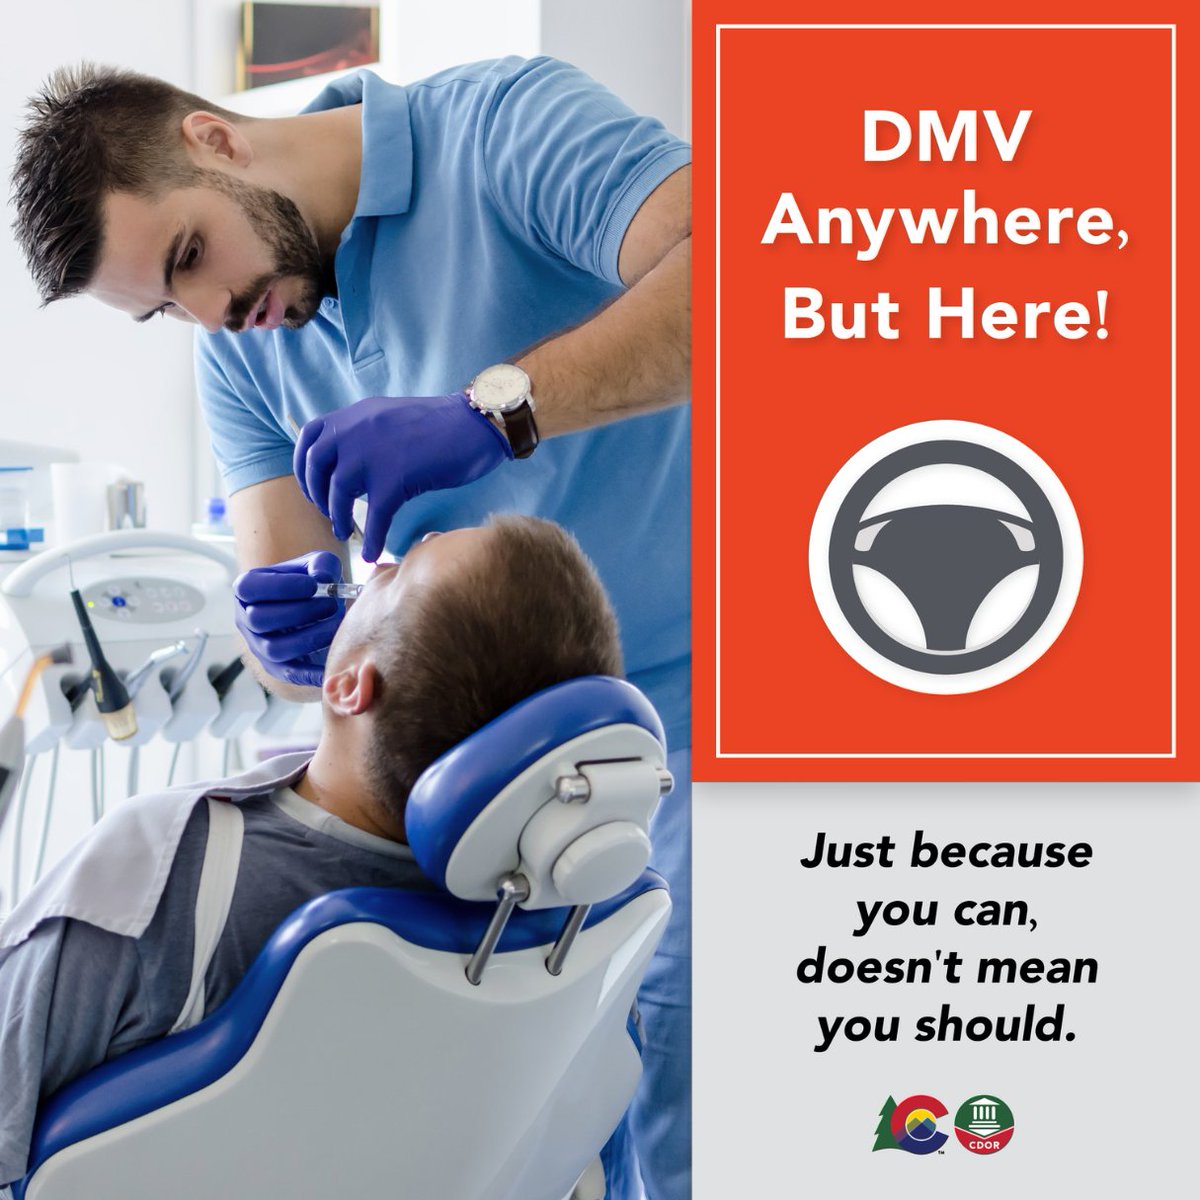 Routine cleaning or root canal 🦷 while renewing your license? A visit to the dentist is stressful enough. The DMV can wait! #JustBecauseYouCan